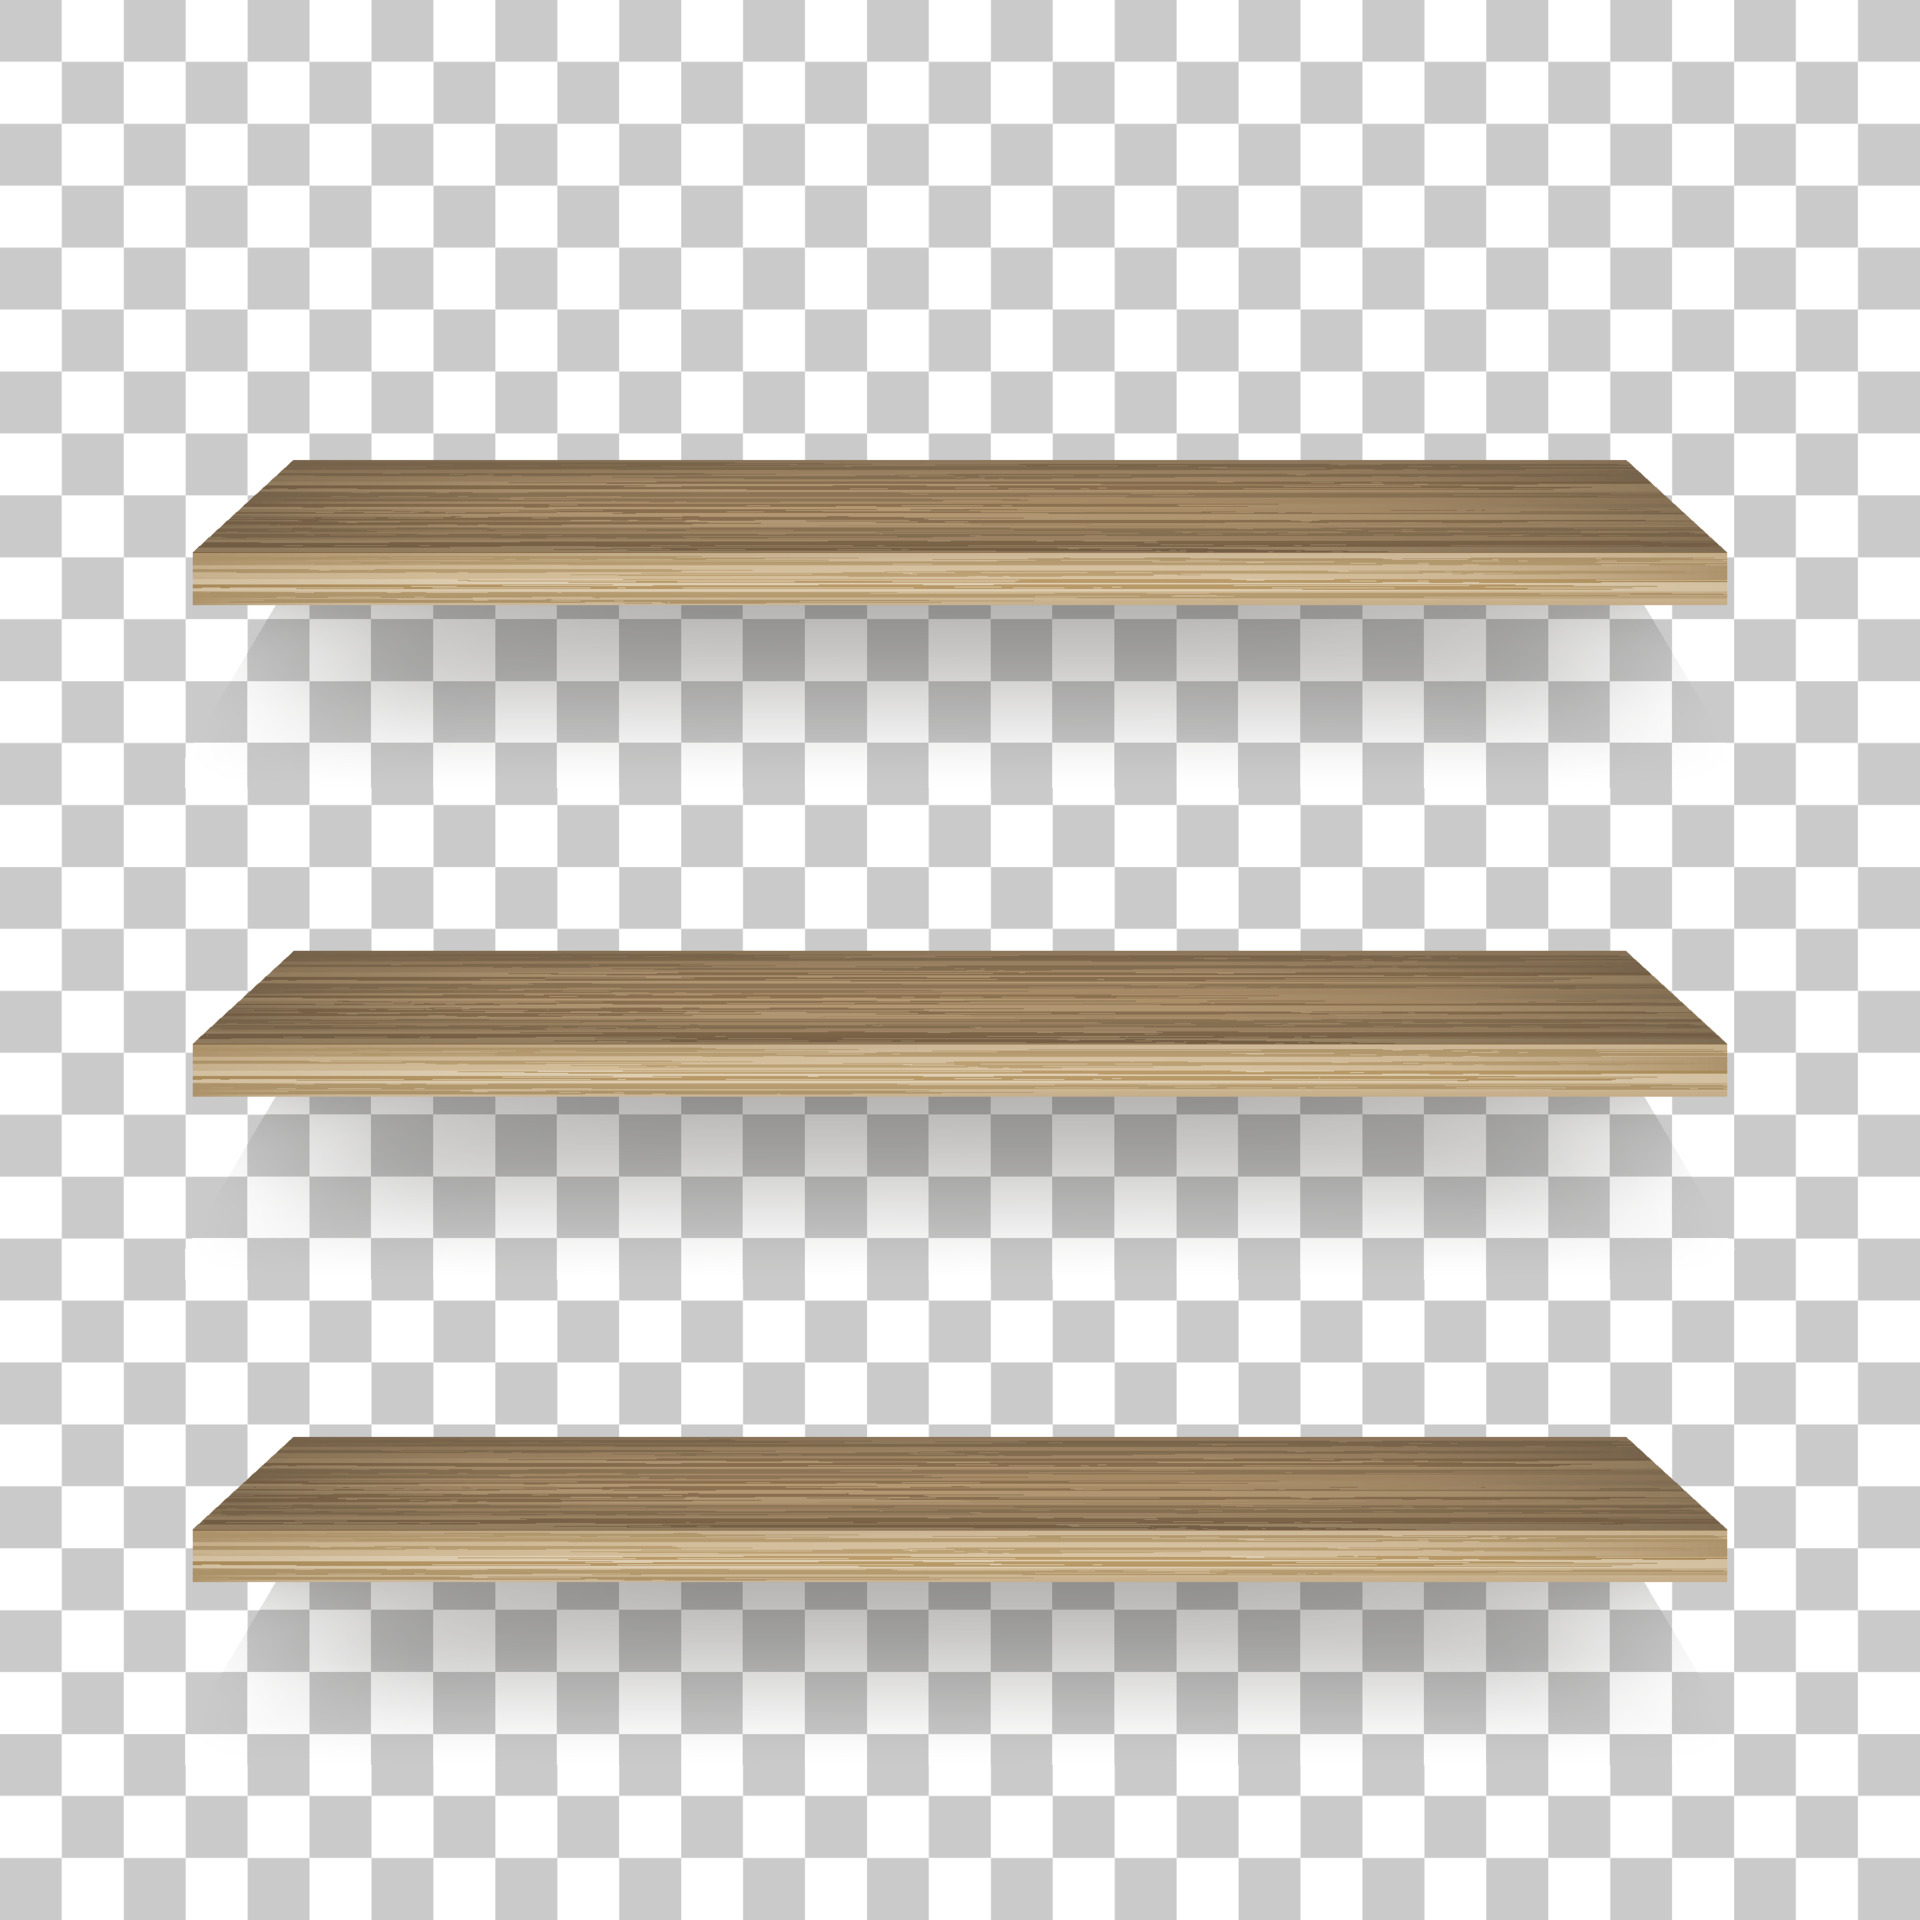 Wooden shelf on transparent background with soft shadow. 3D empty wooden shelves. Vector